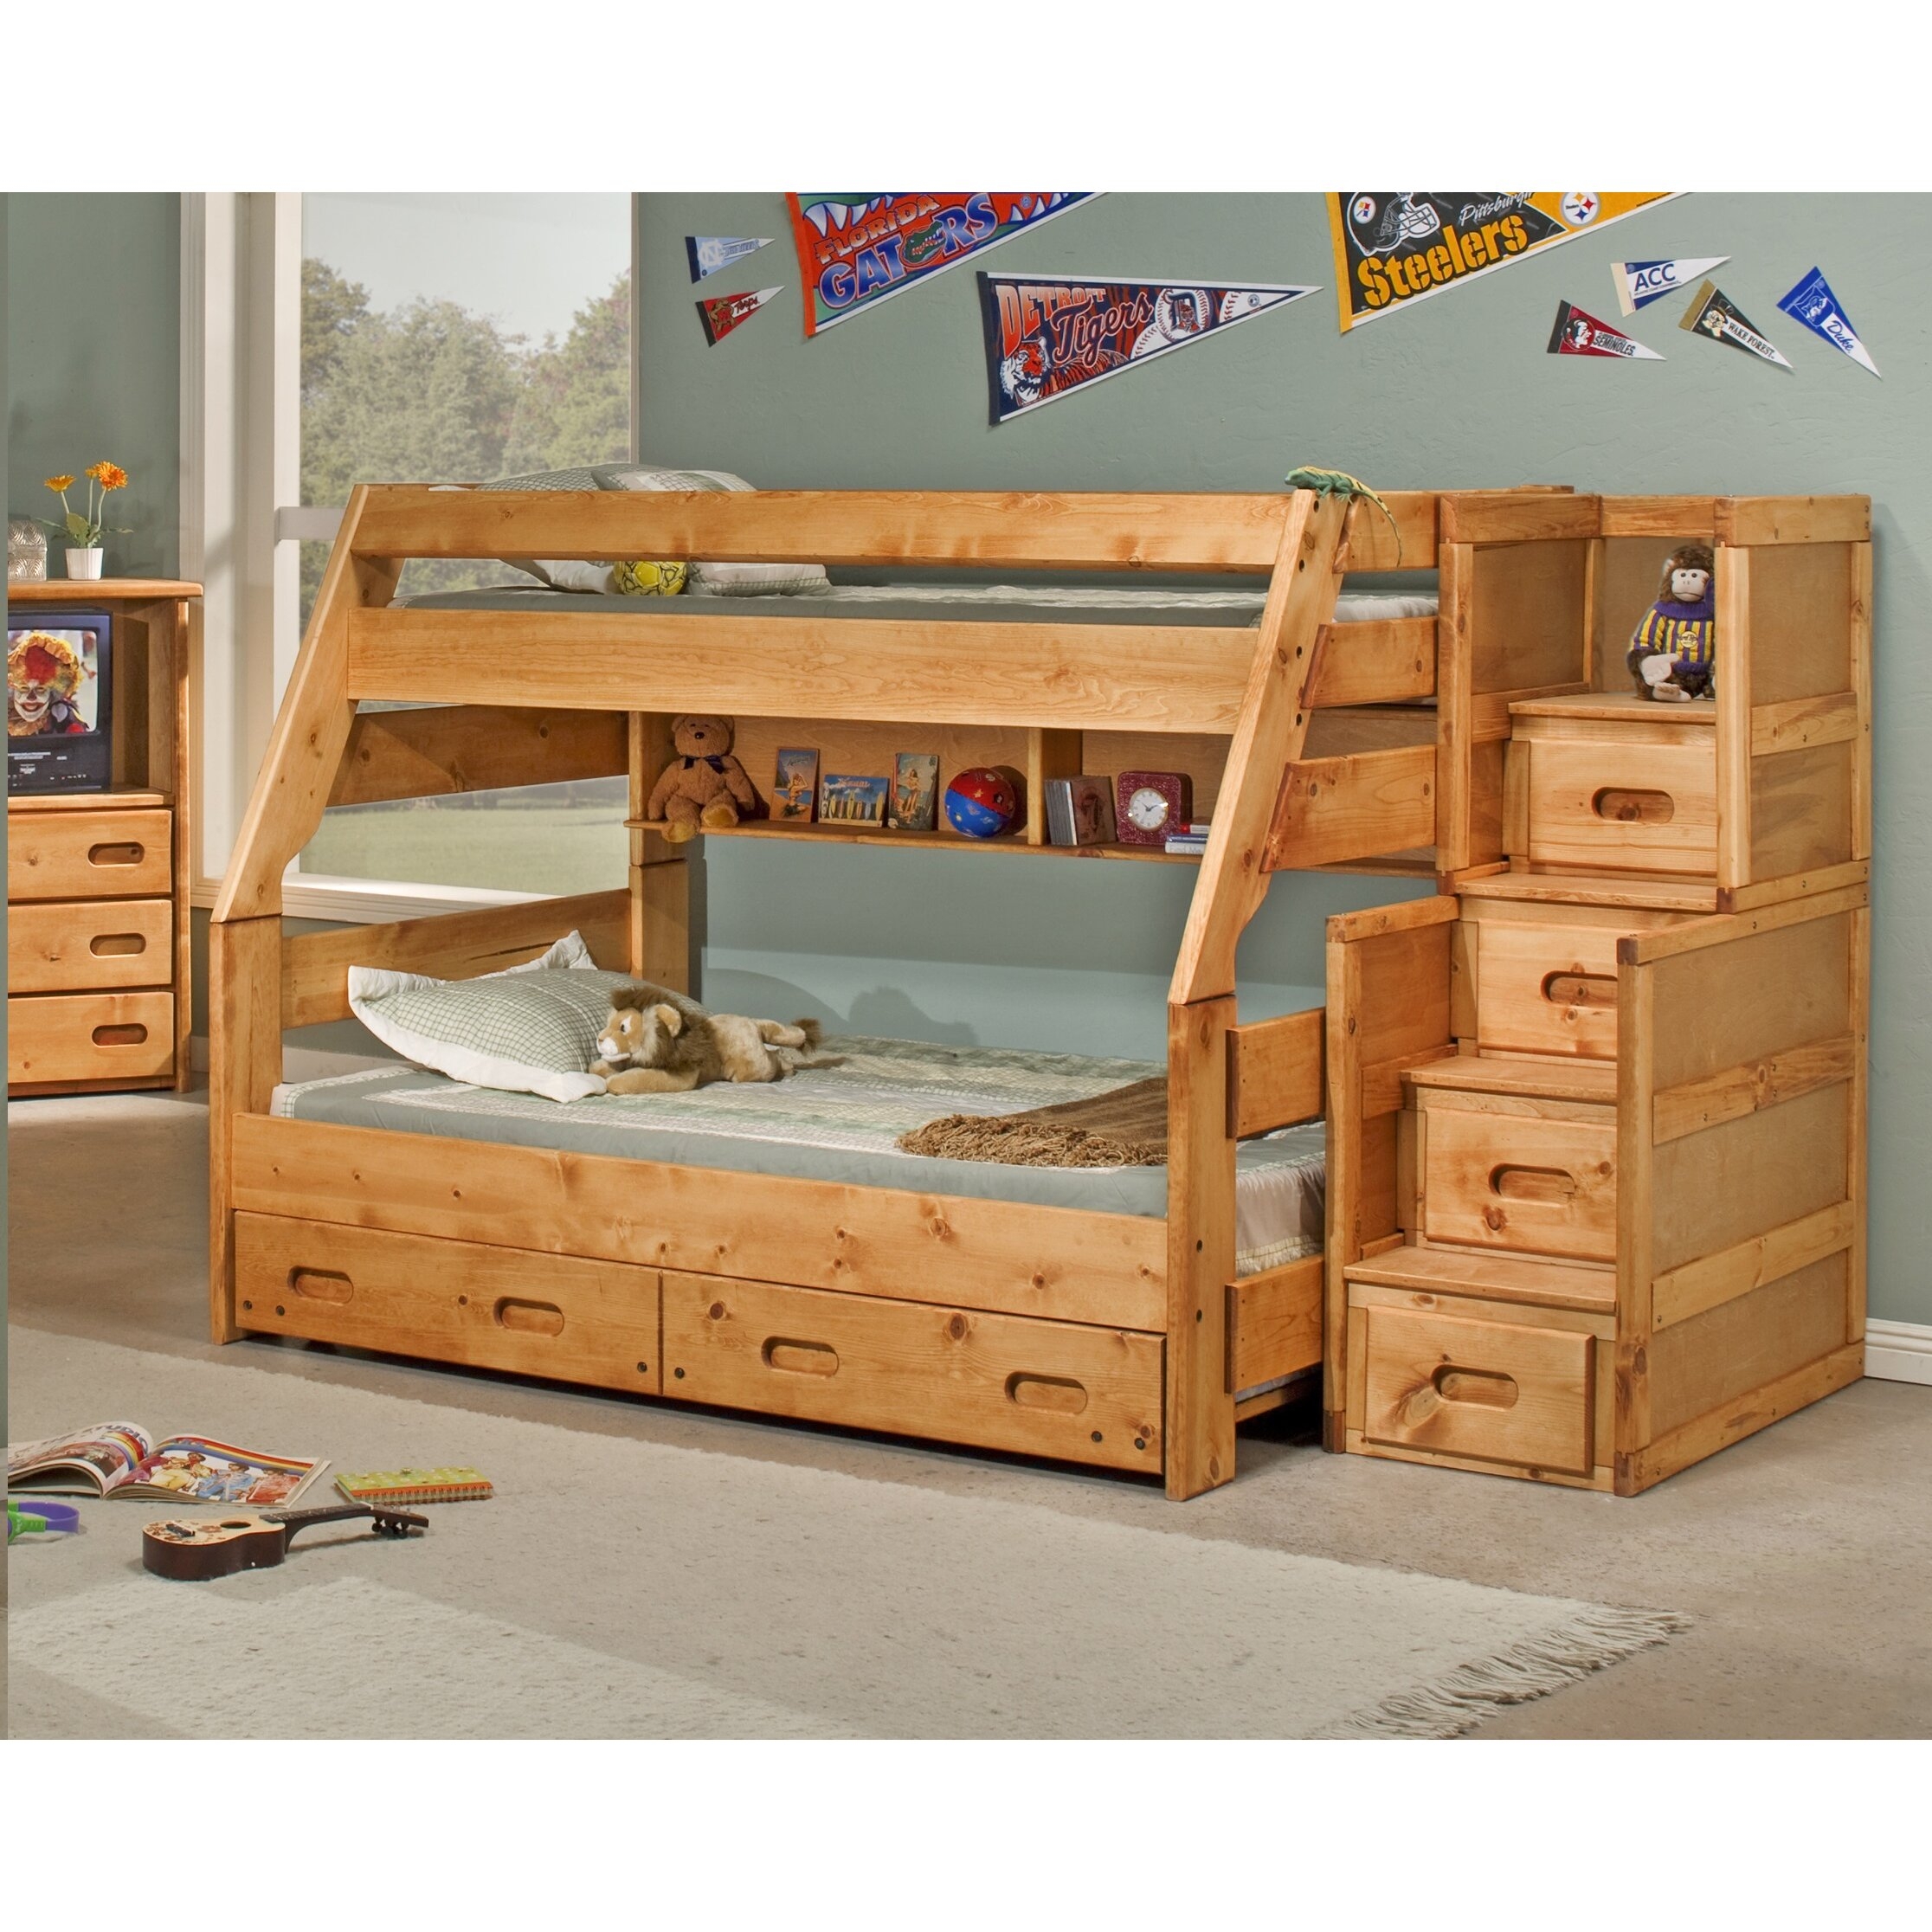 Chelsea home twin over full bunk bed with trundle and